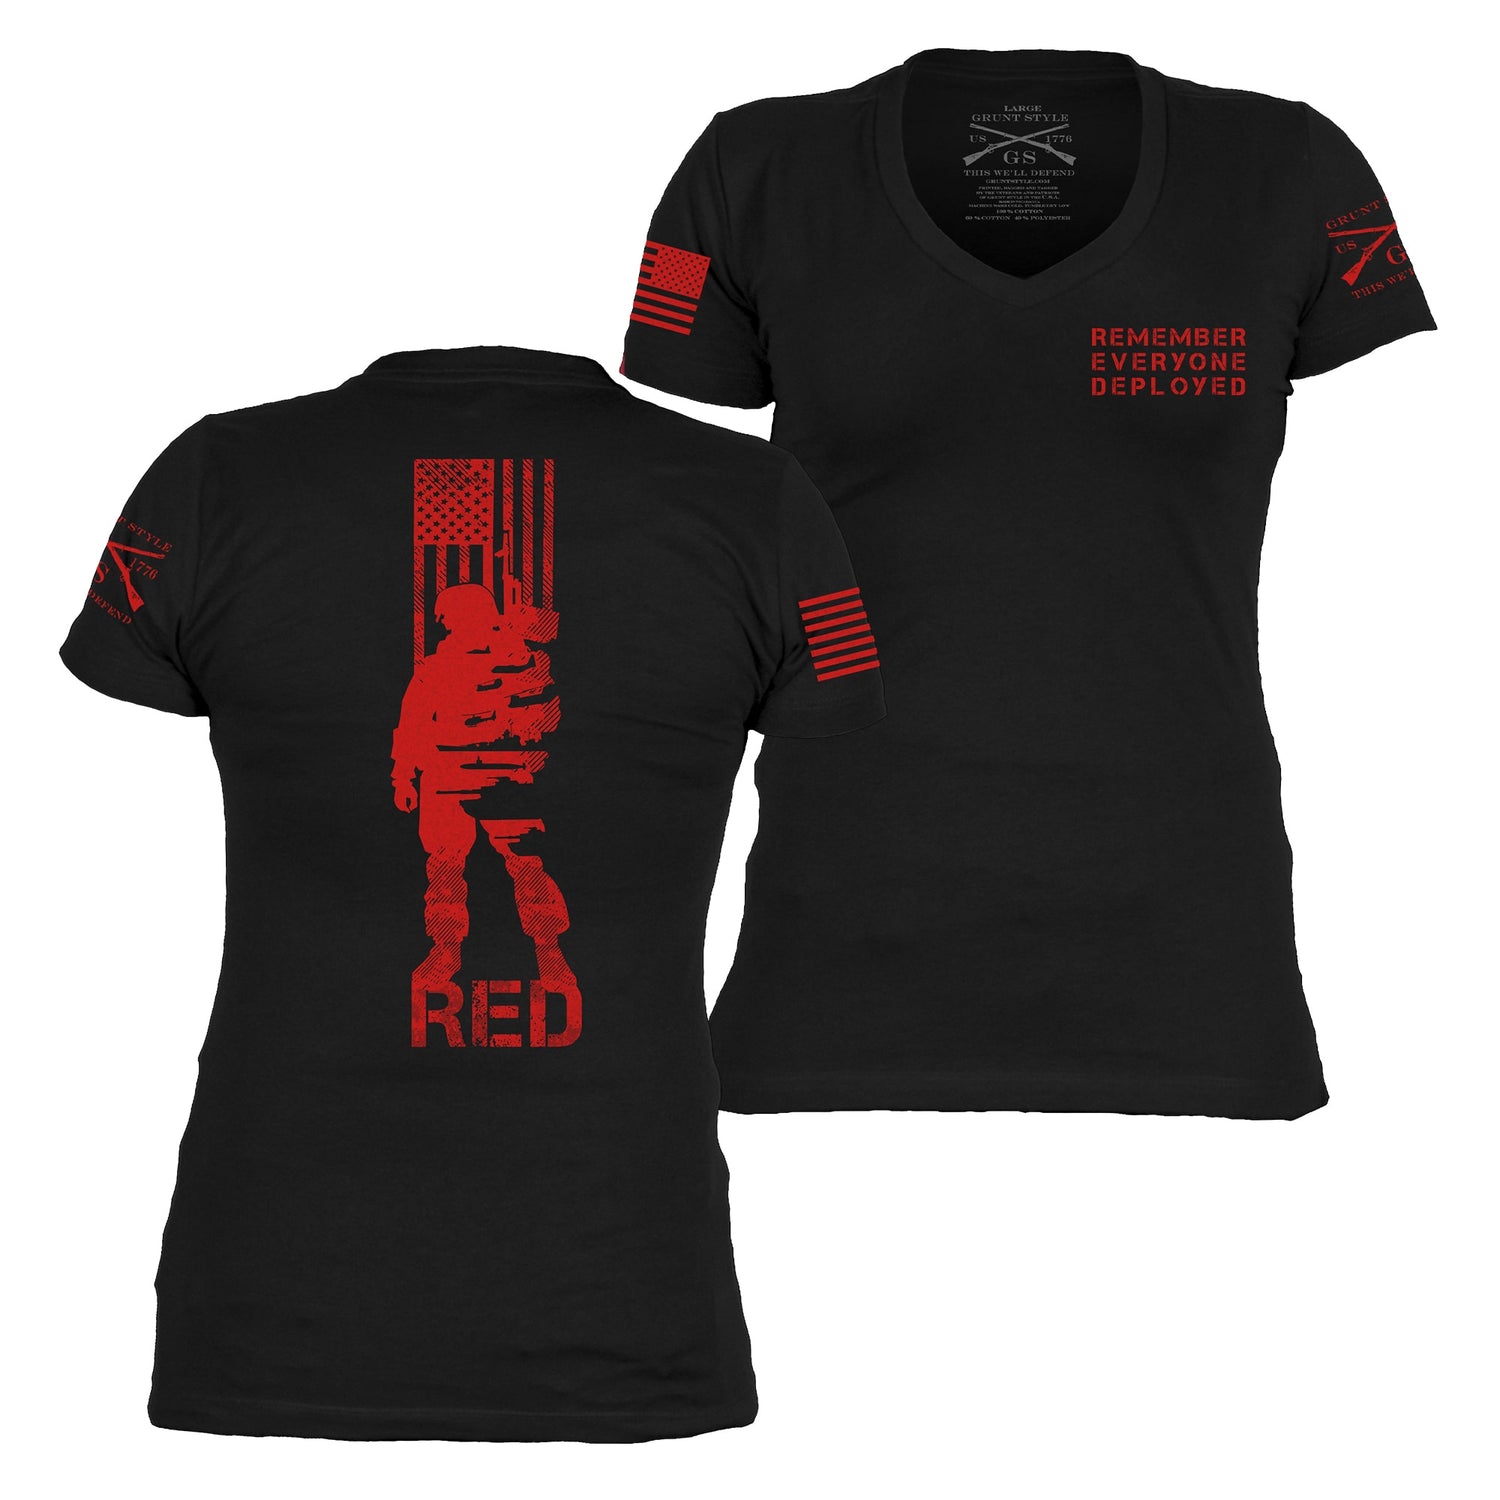 RED Friday Shirts for Women 